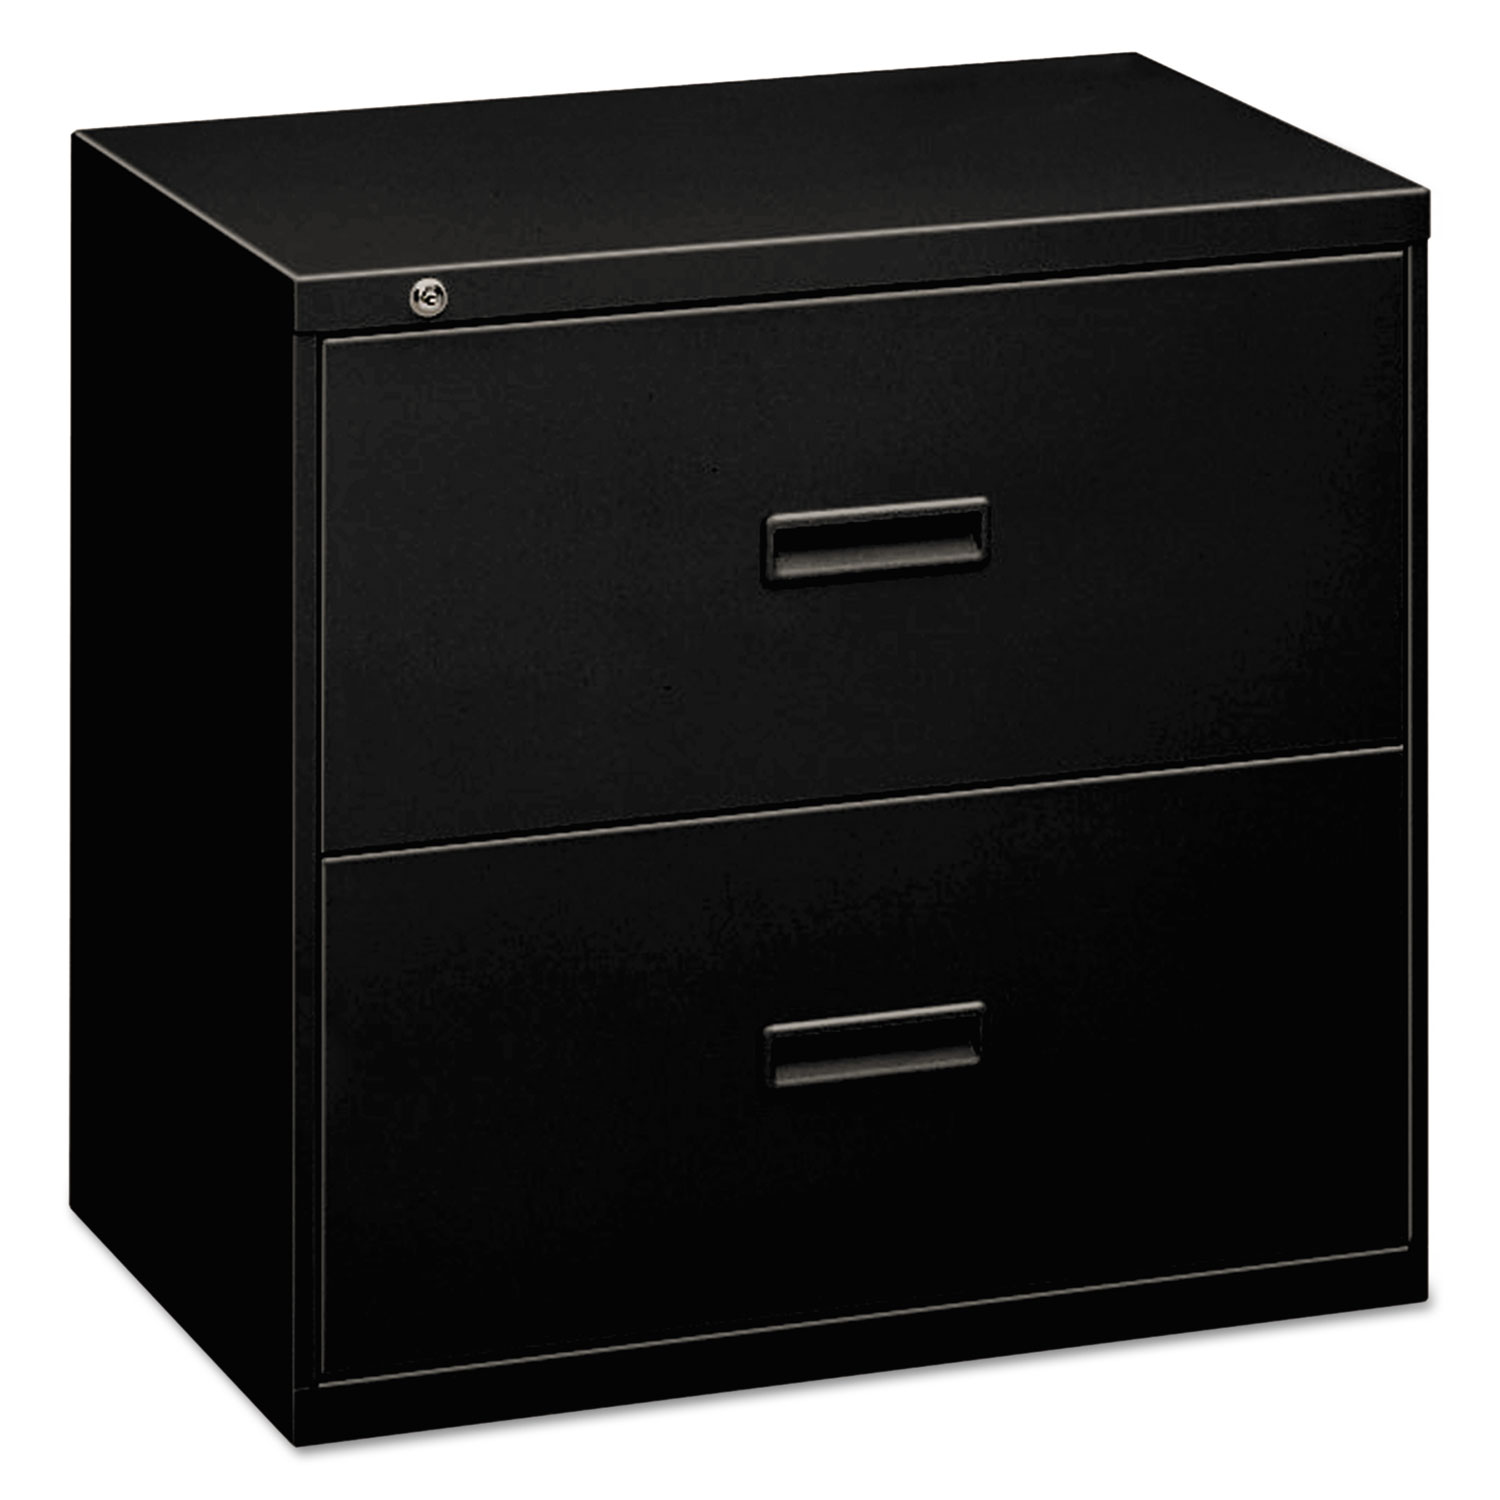 400 Series Two-Drawer Lateral File, 30w x 19-1/4d x 28-3/8, Black